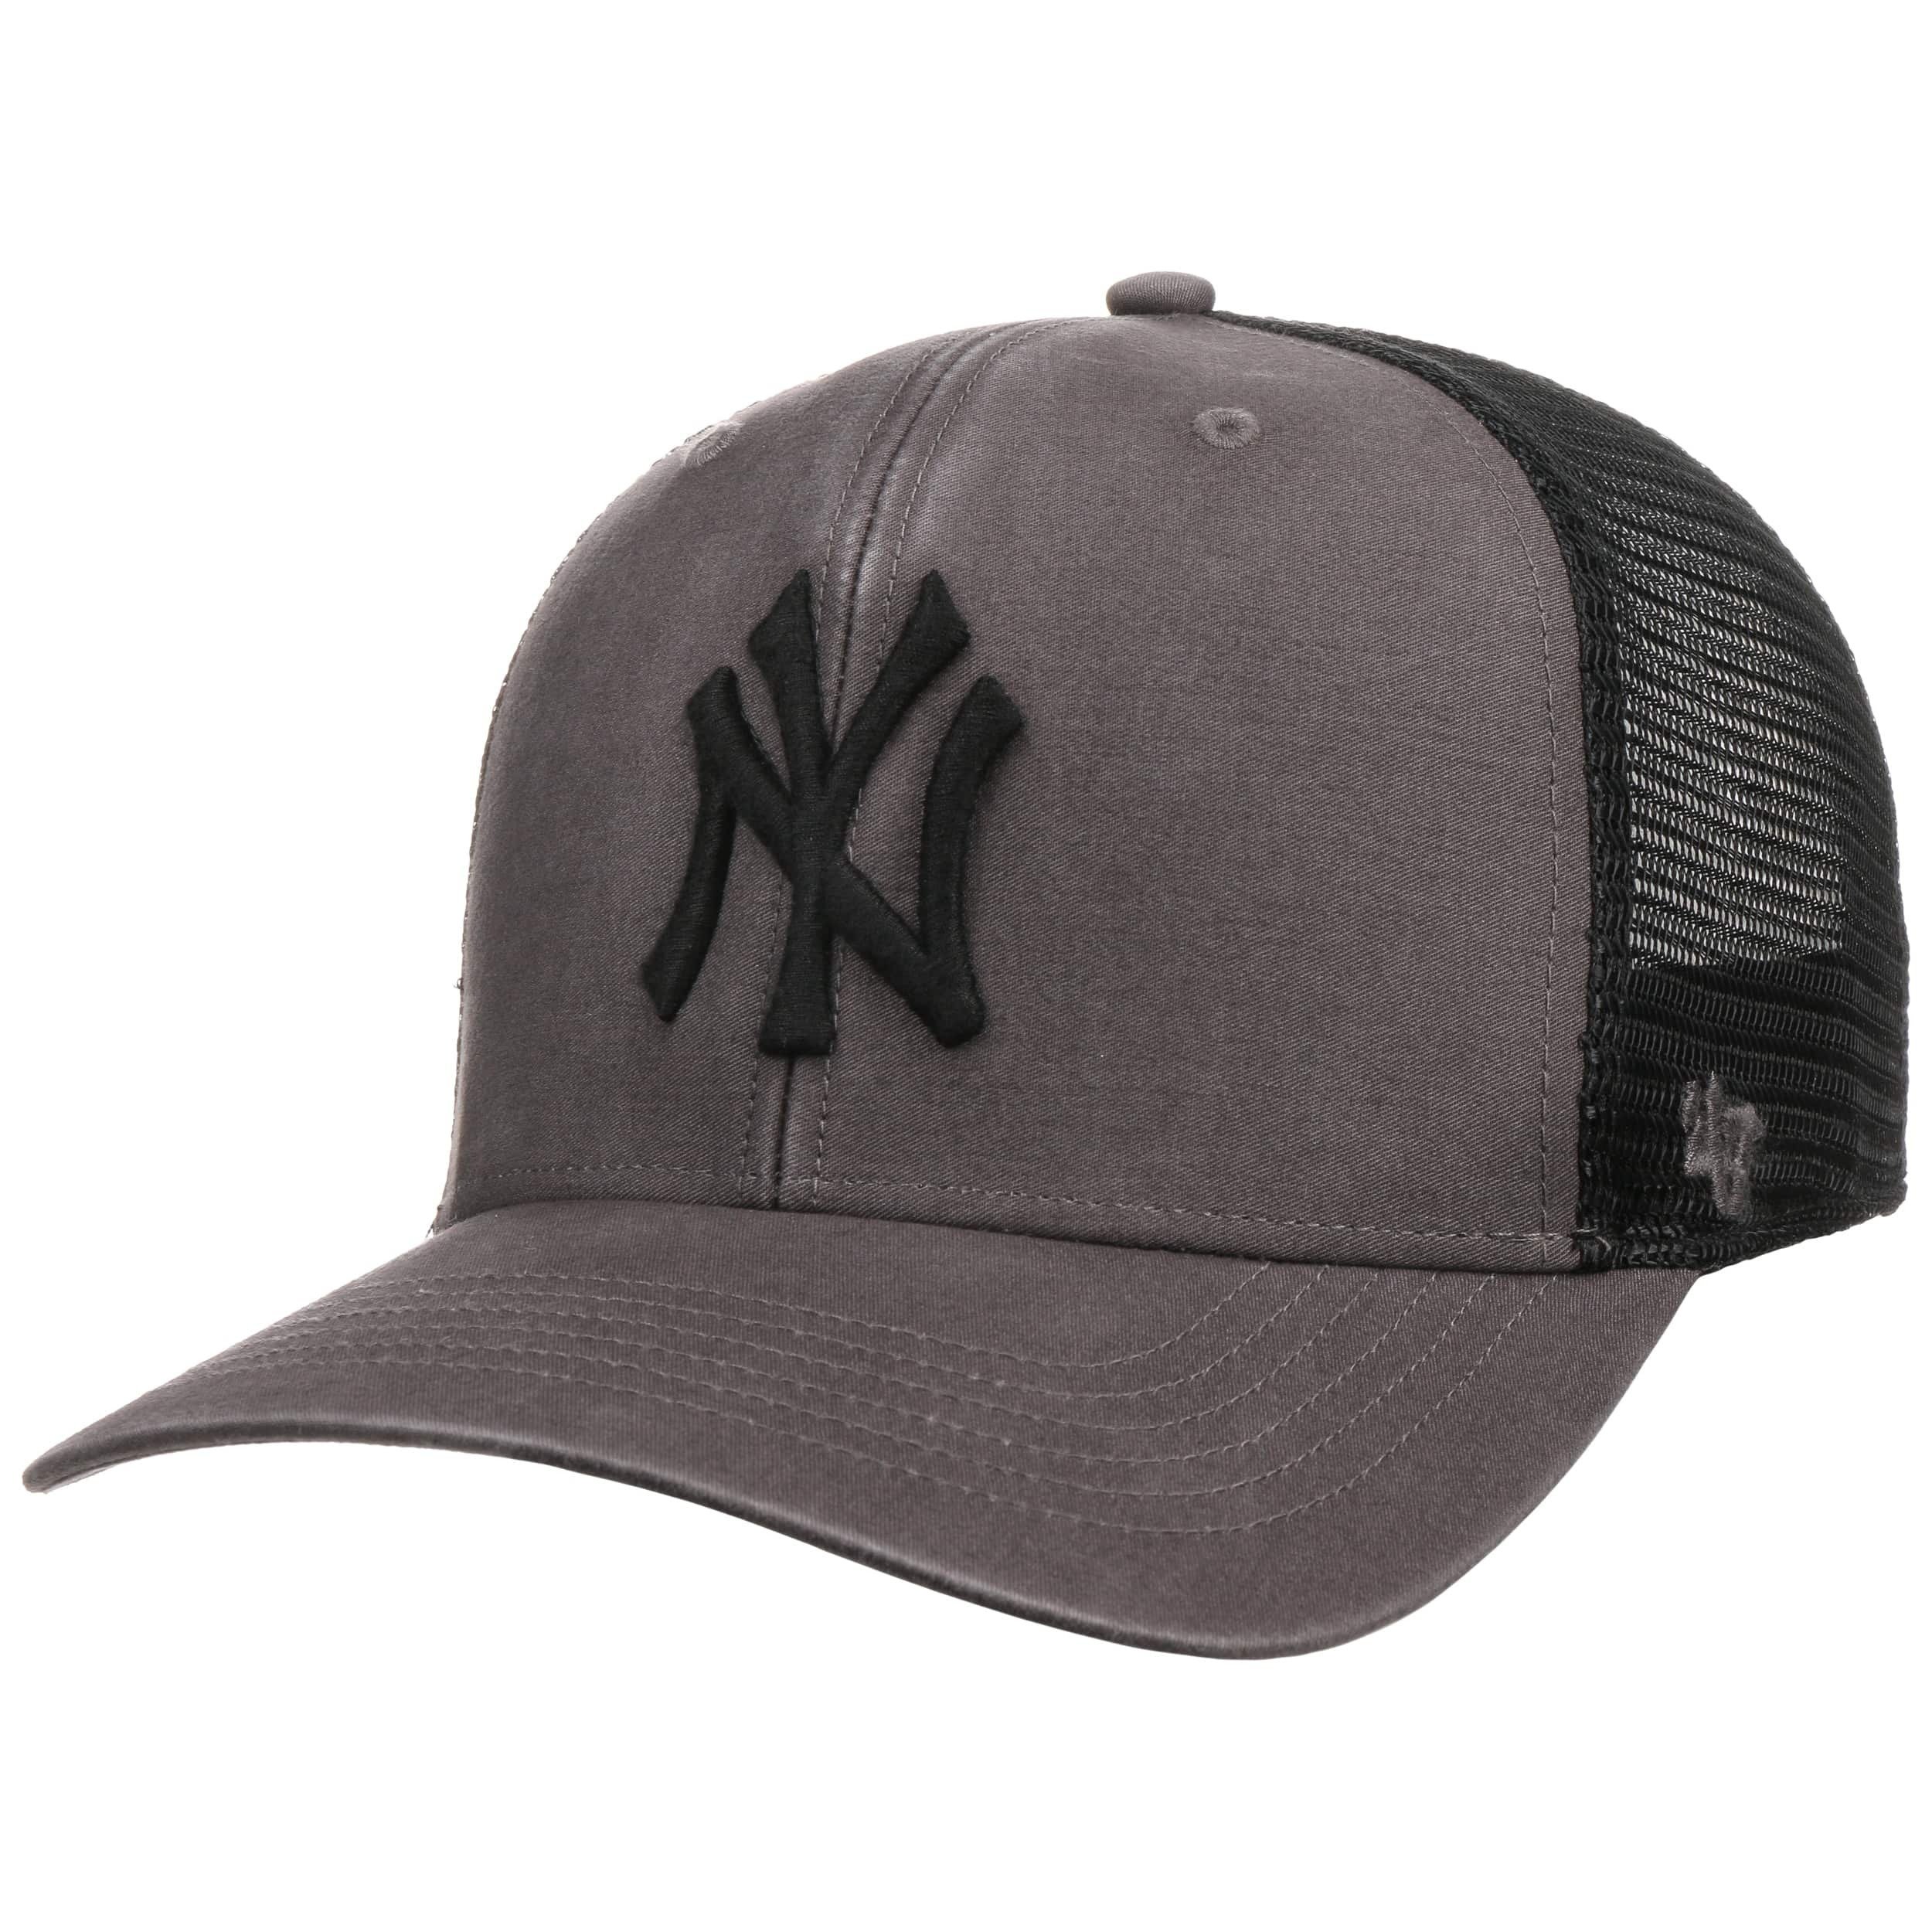 Casquette MVP NY Yankees Cap by 47 Brand - 27,95 €